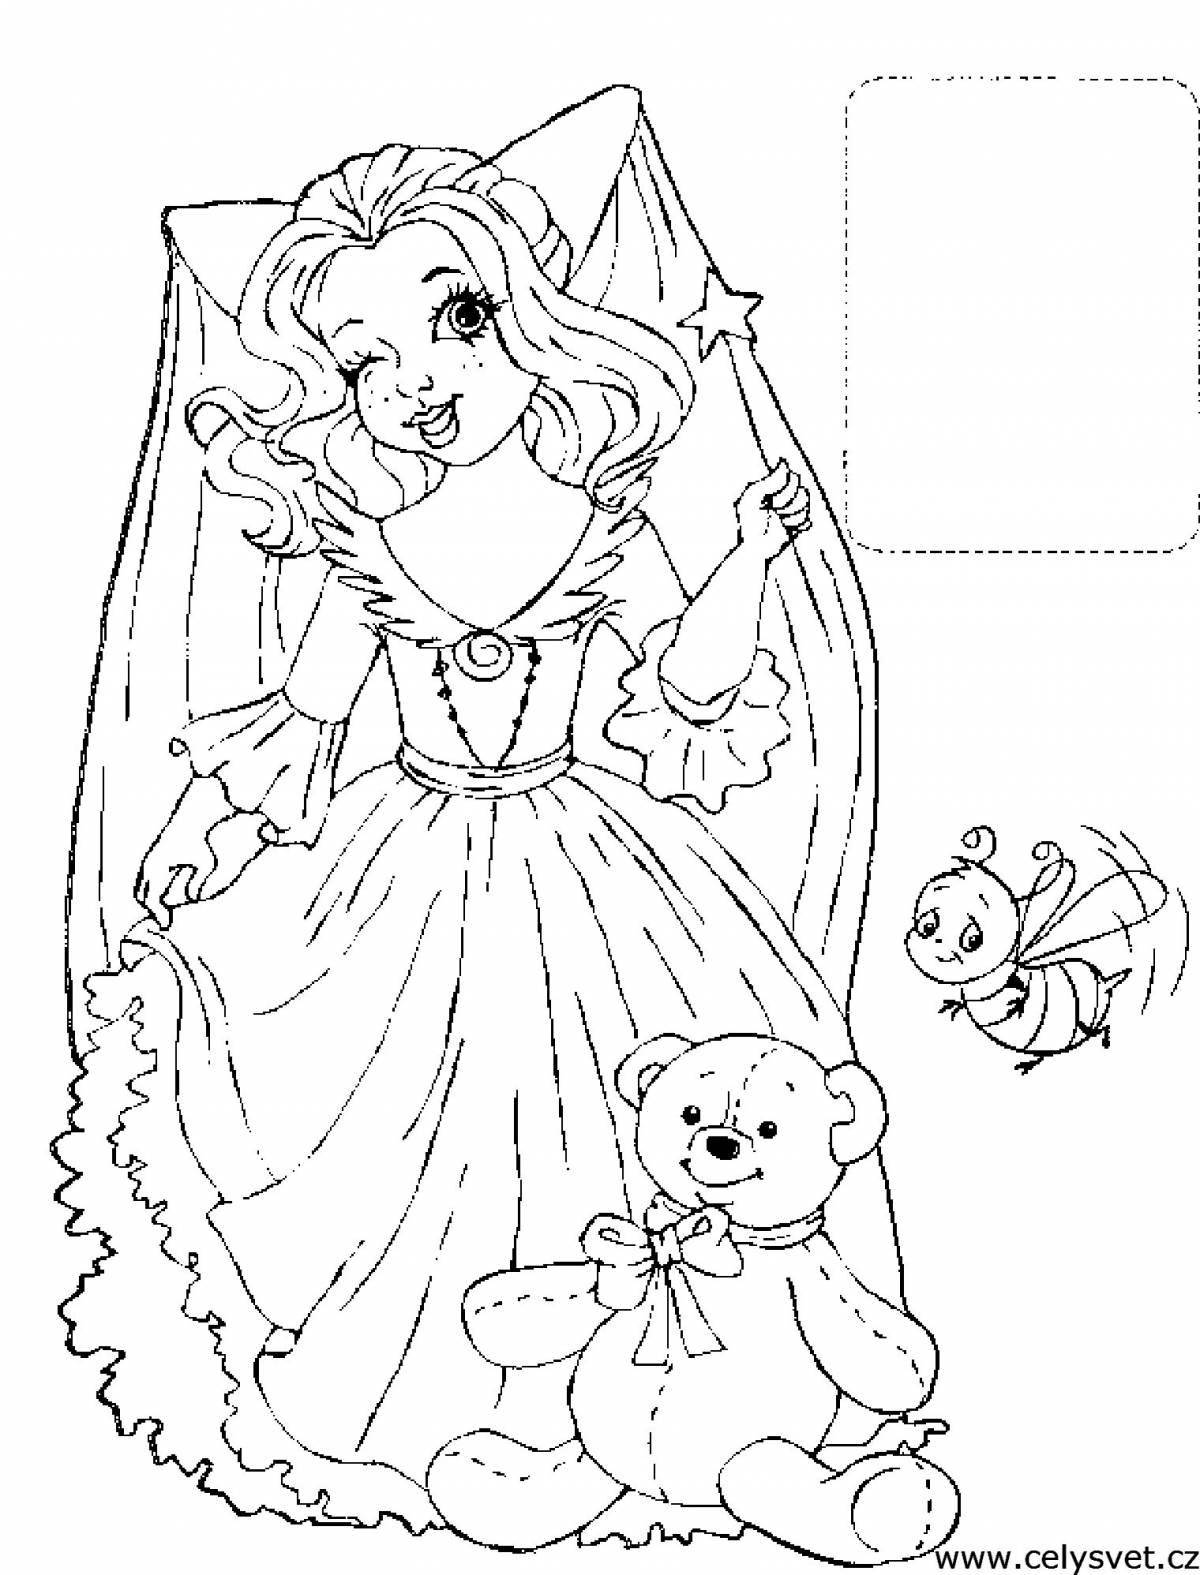 Colourful coloring book for girls princesses 5-6 years old